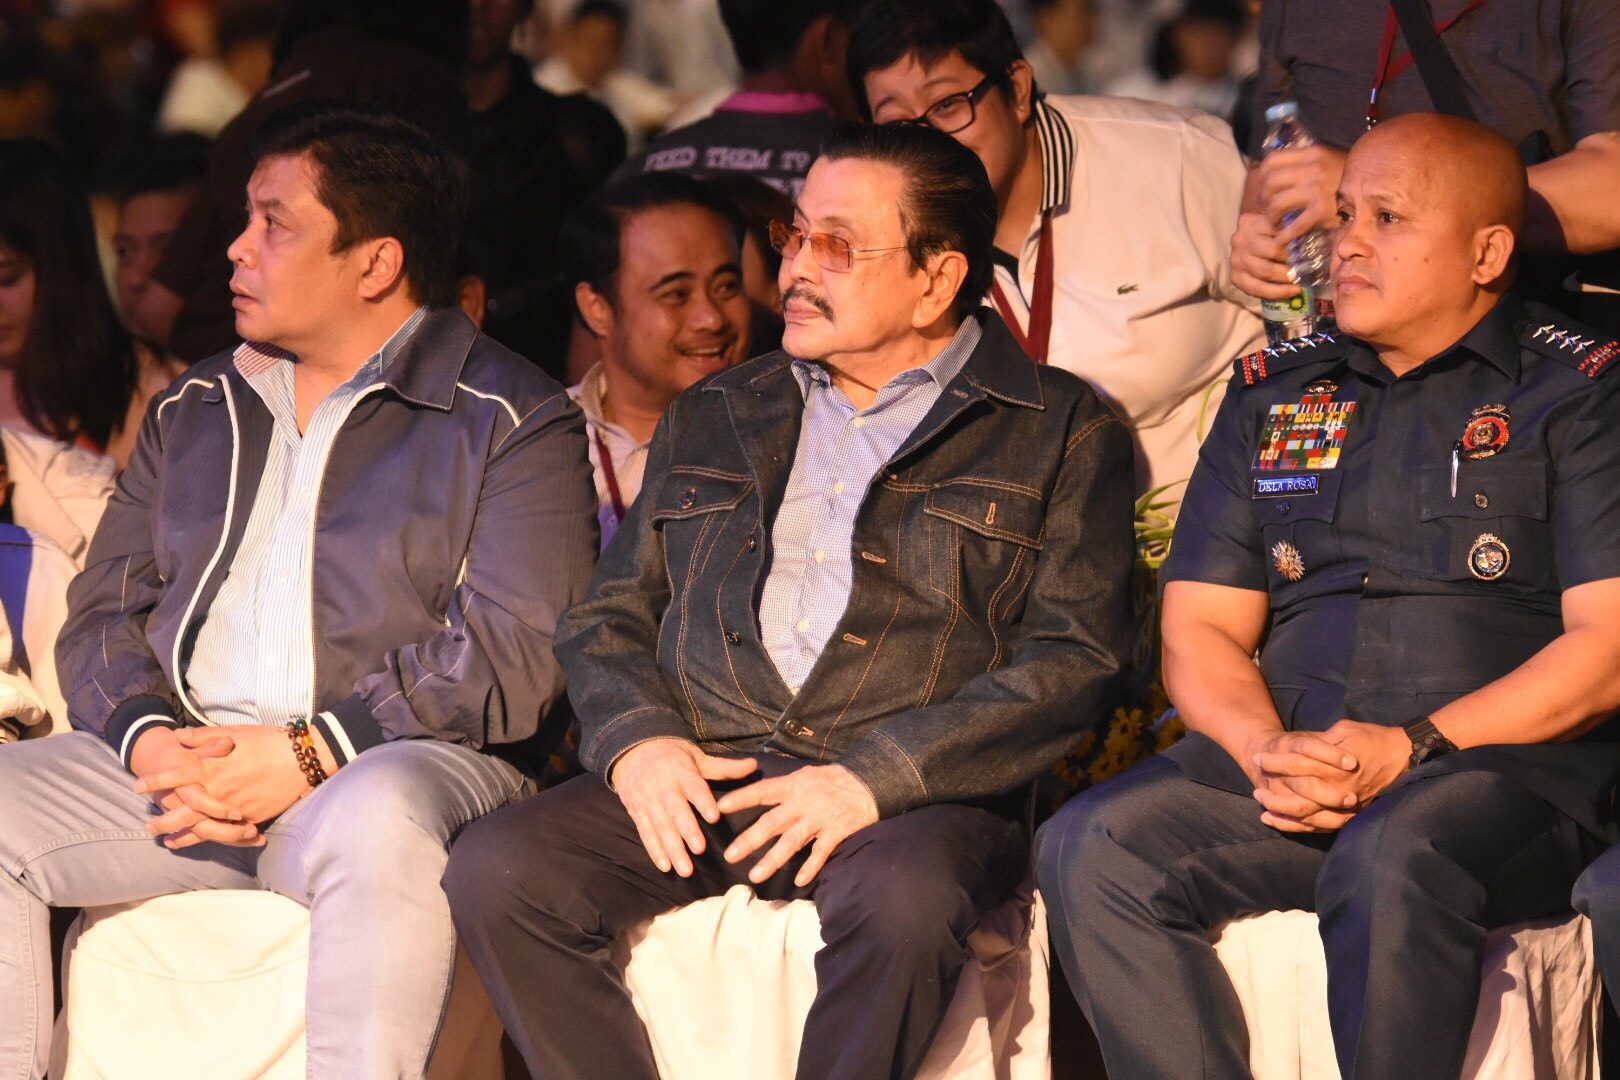  VIPS. Among those who attended the Midnight Mass were Manila Mayor Joseph Estrada and his son, Jinggoy, and PNP chief Director General Ronald de la Rosa. Photo by Angie de Silva/Rappler 